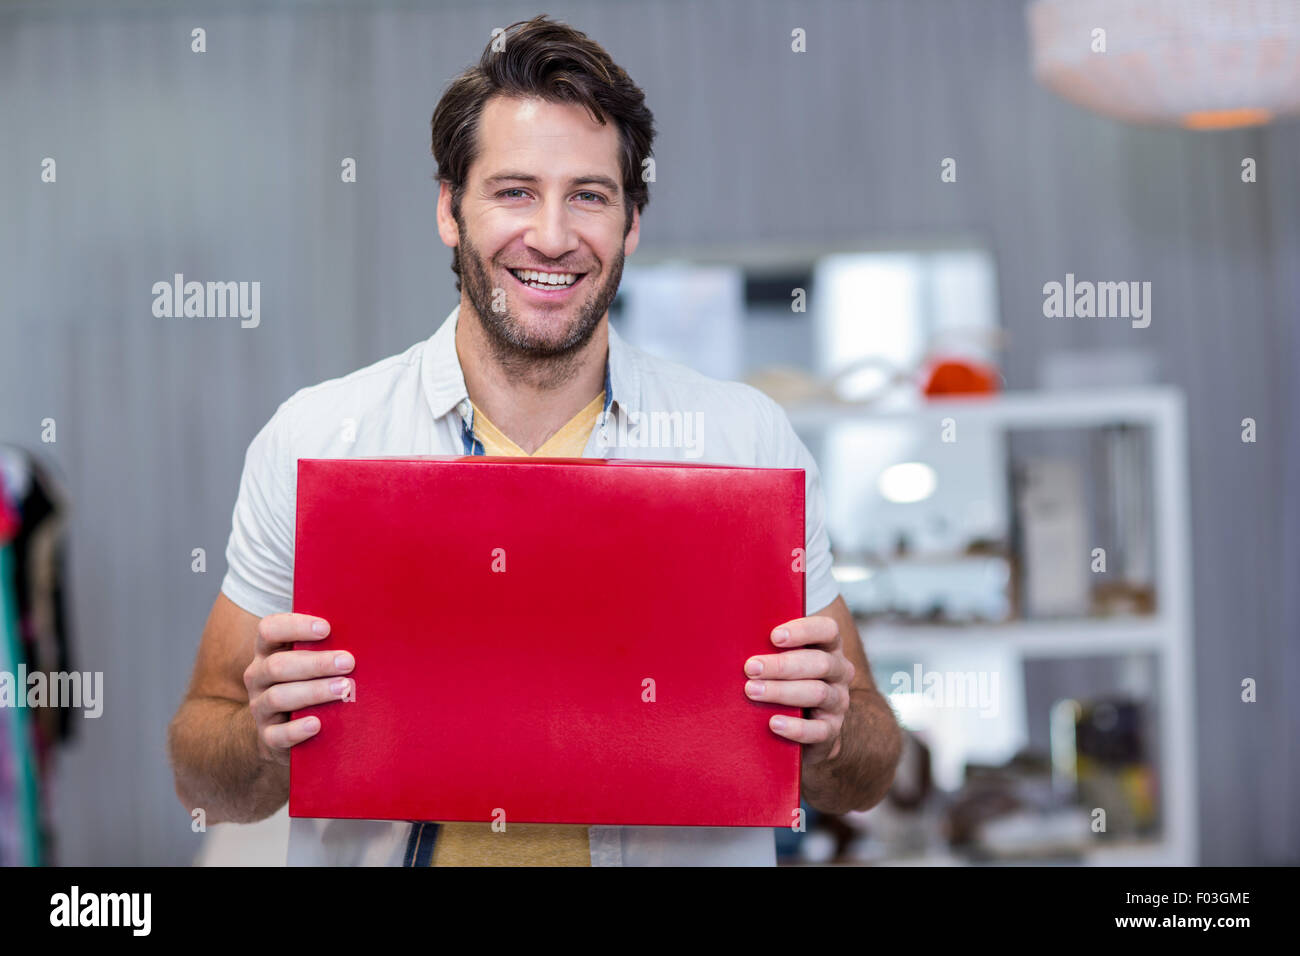 Smiling man holding up red blank sign Stock Photo